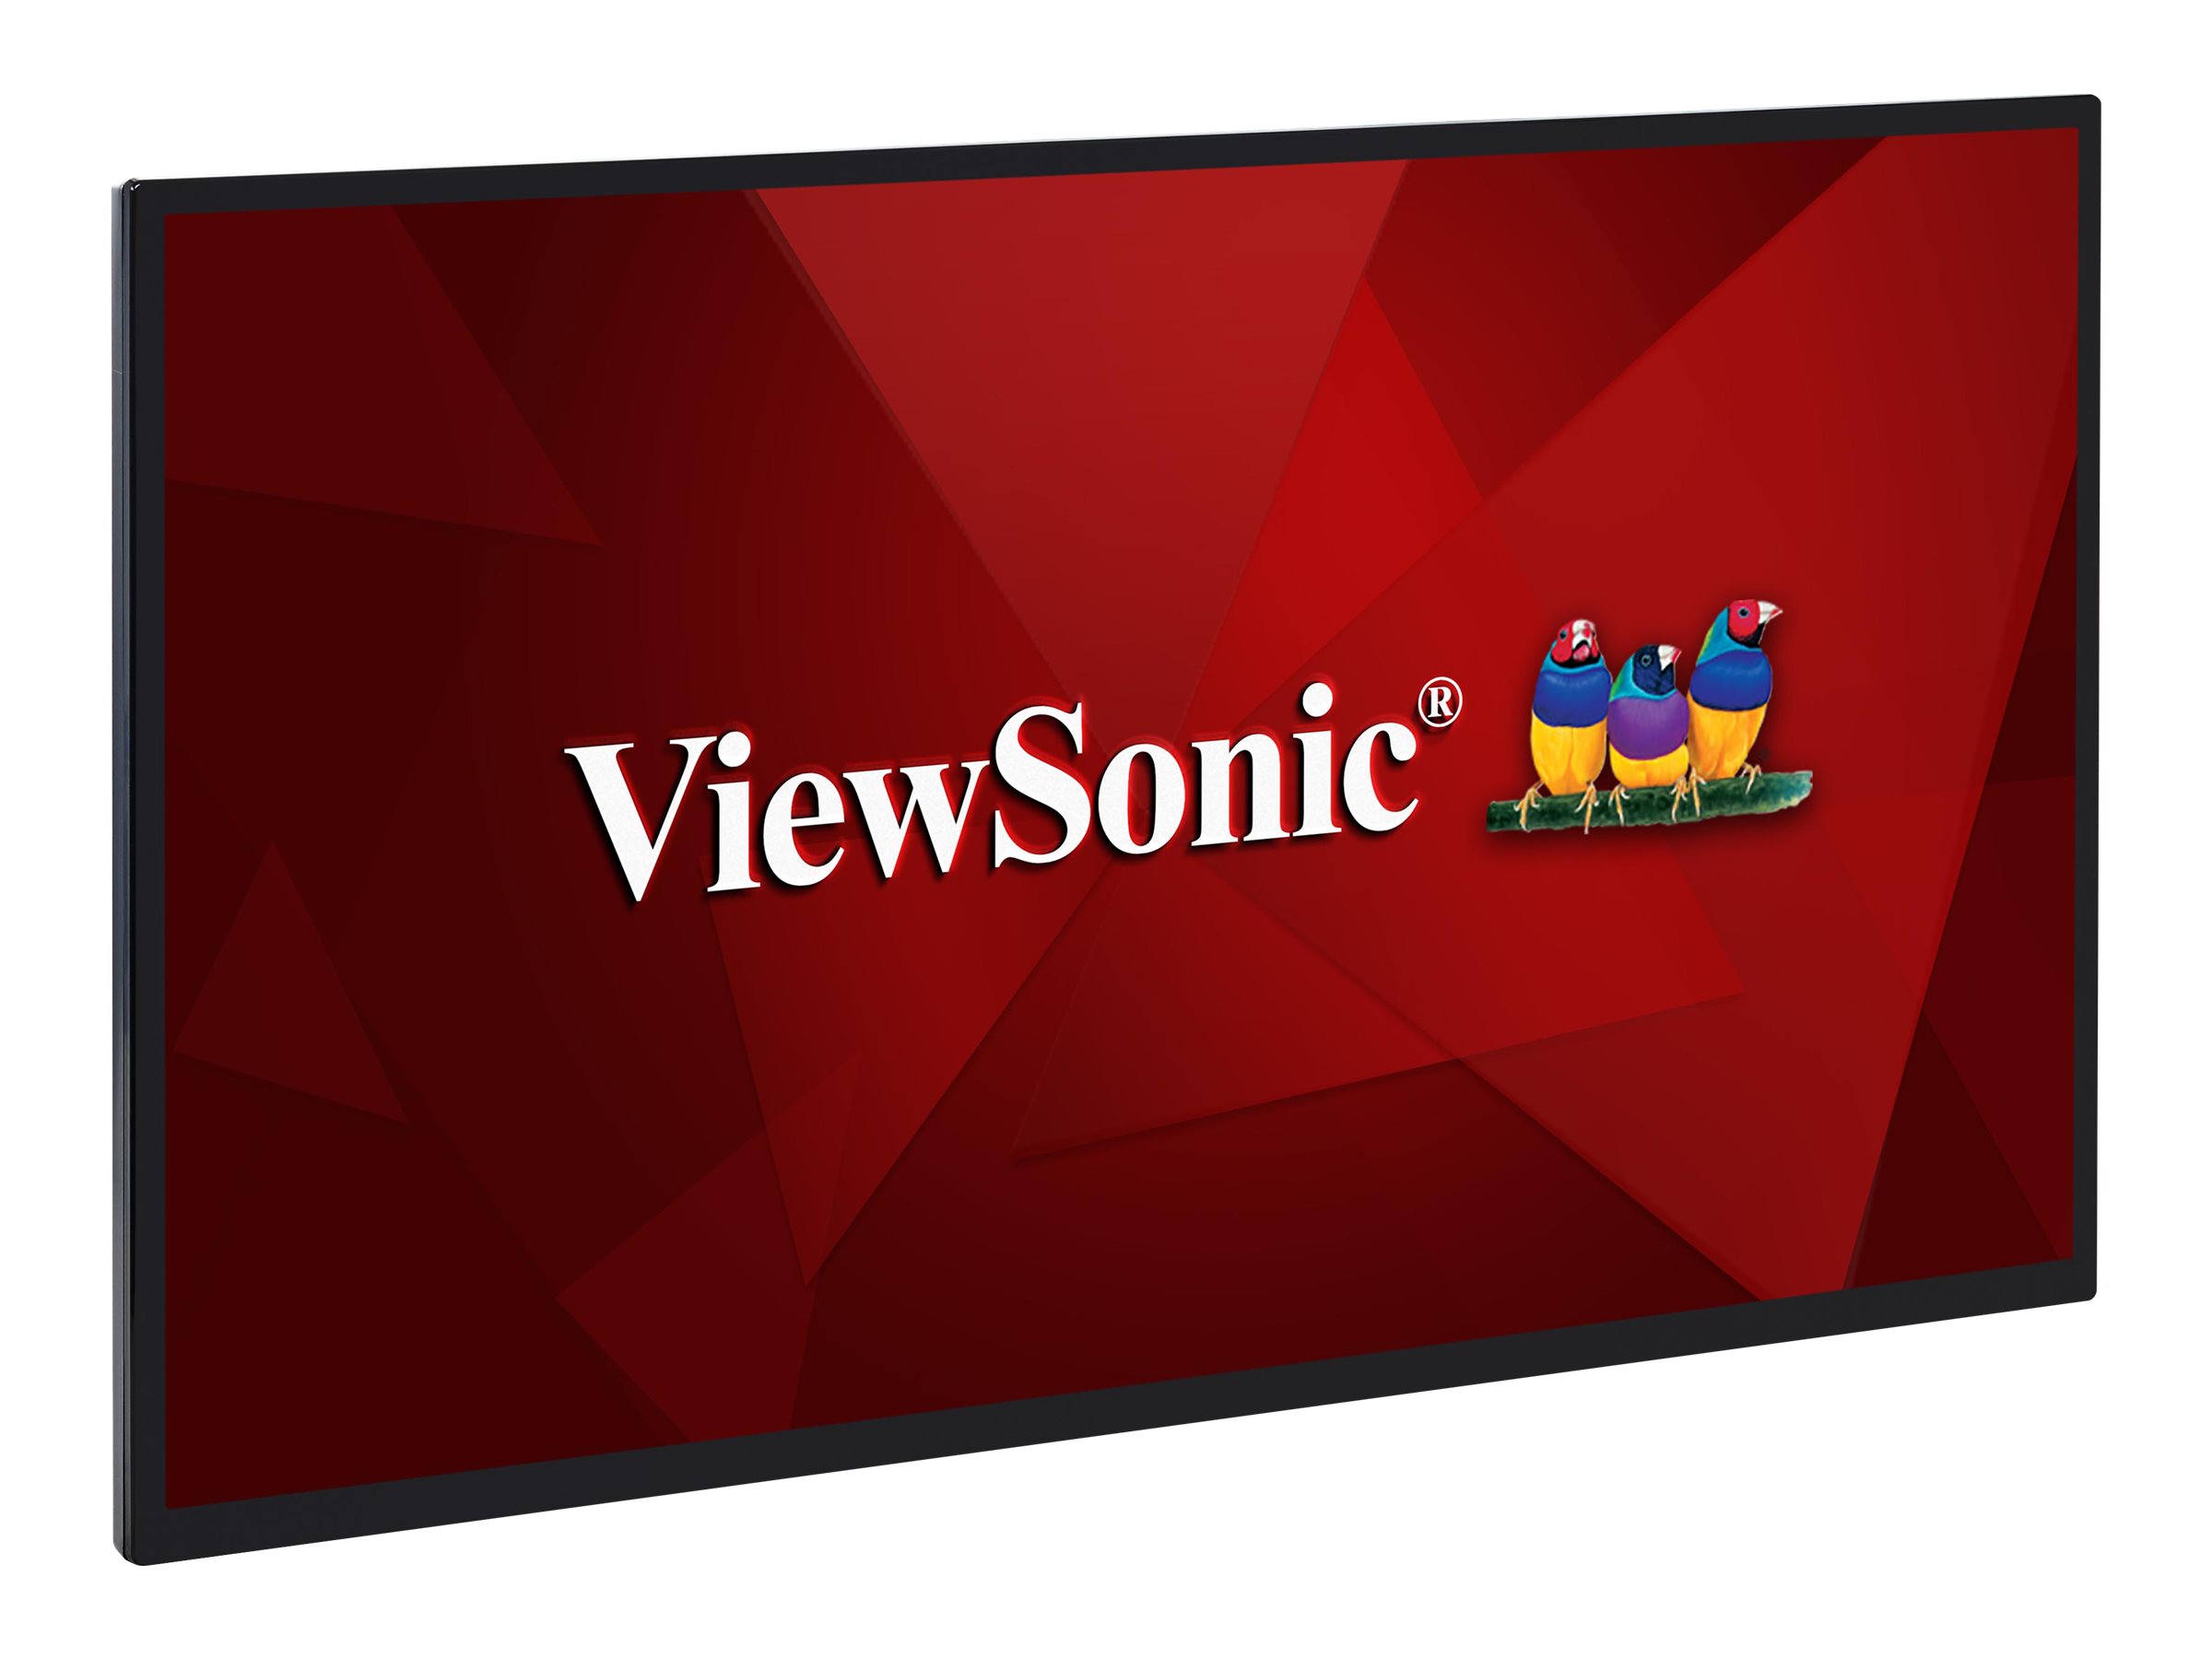 Viewsonic Cde3205 - 32" Diagonal Class (31.5" Viewable) Led-backlit Lcd Display - Signage / Hospitality - 1080p (full Hd) 1920 X 1080 - image 3 of 5